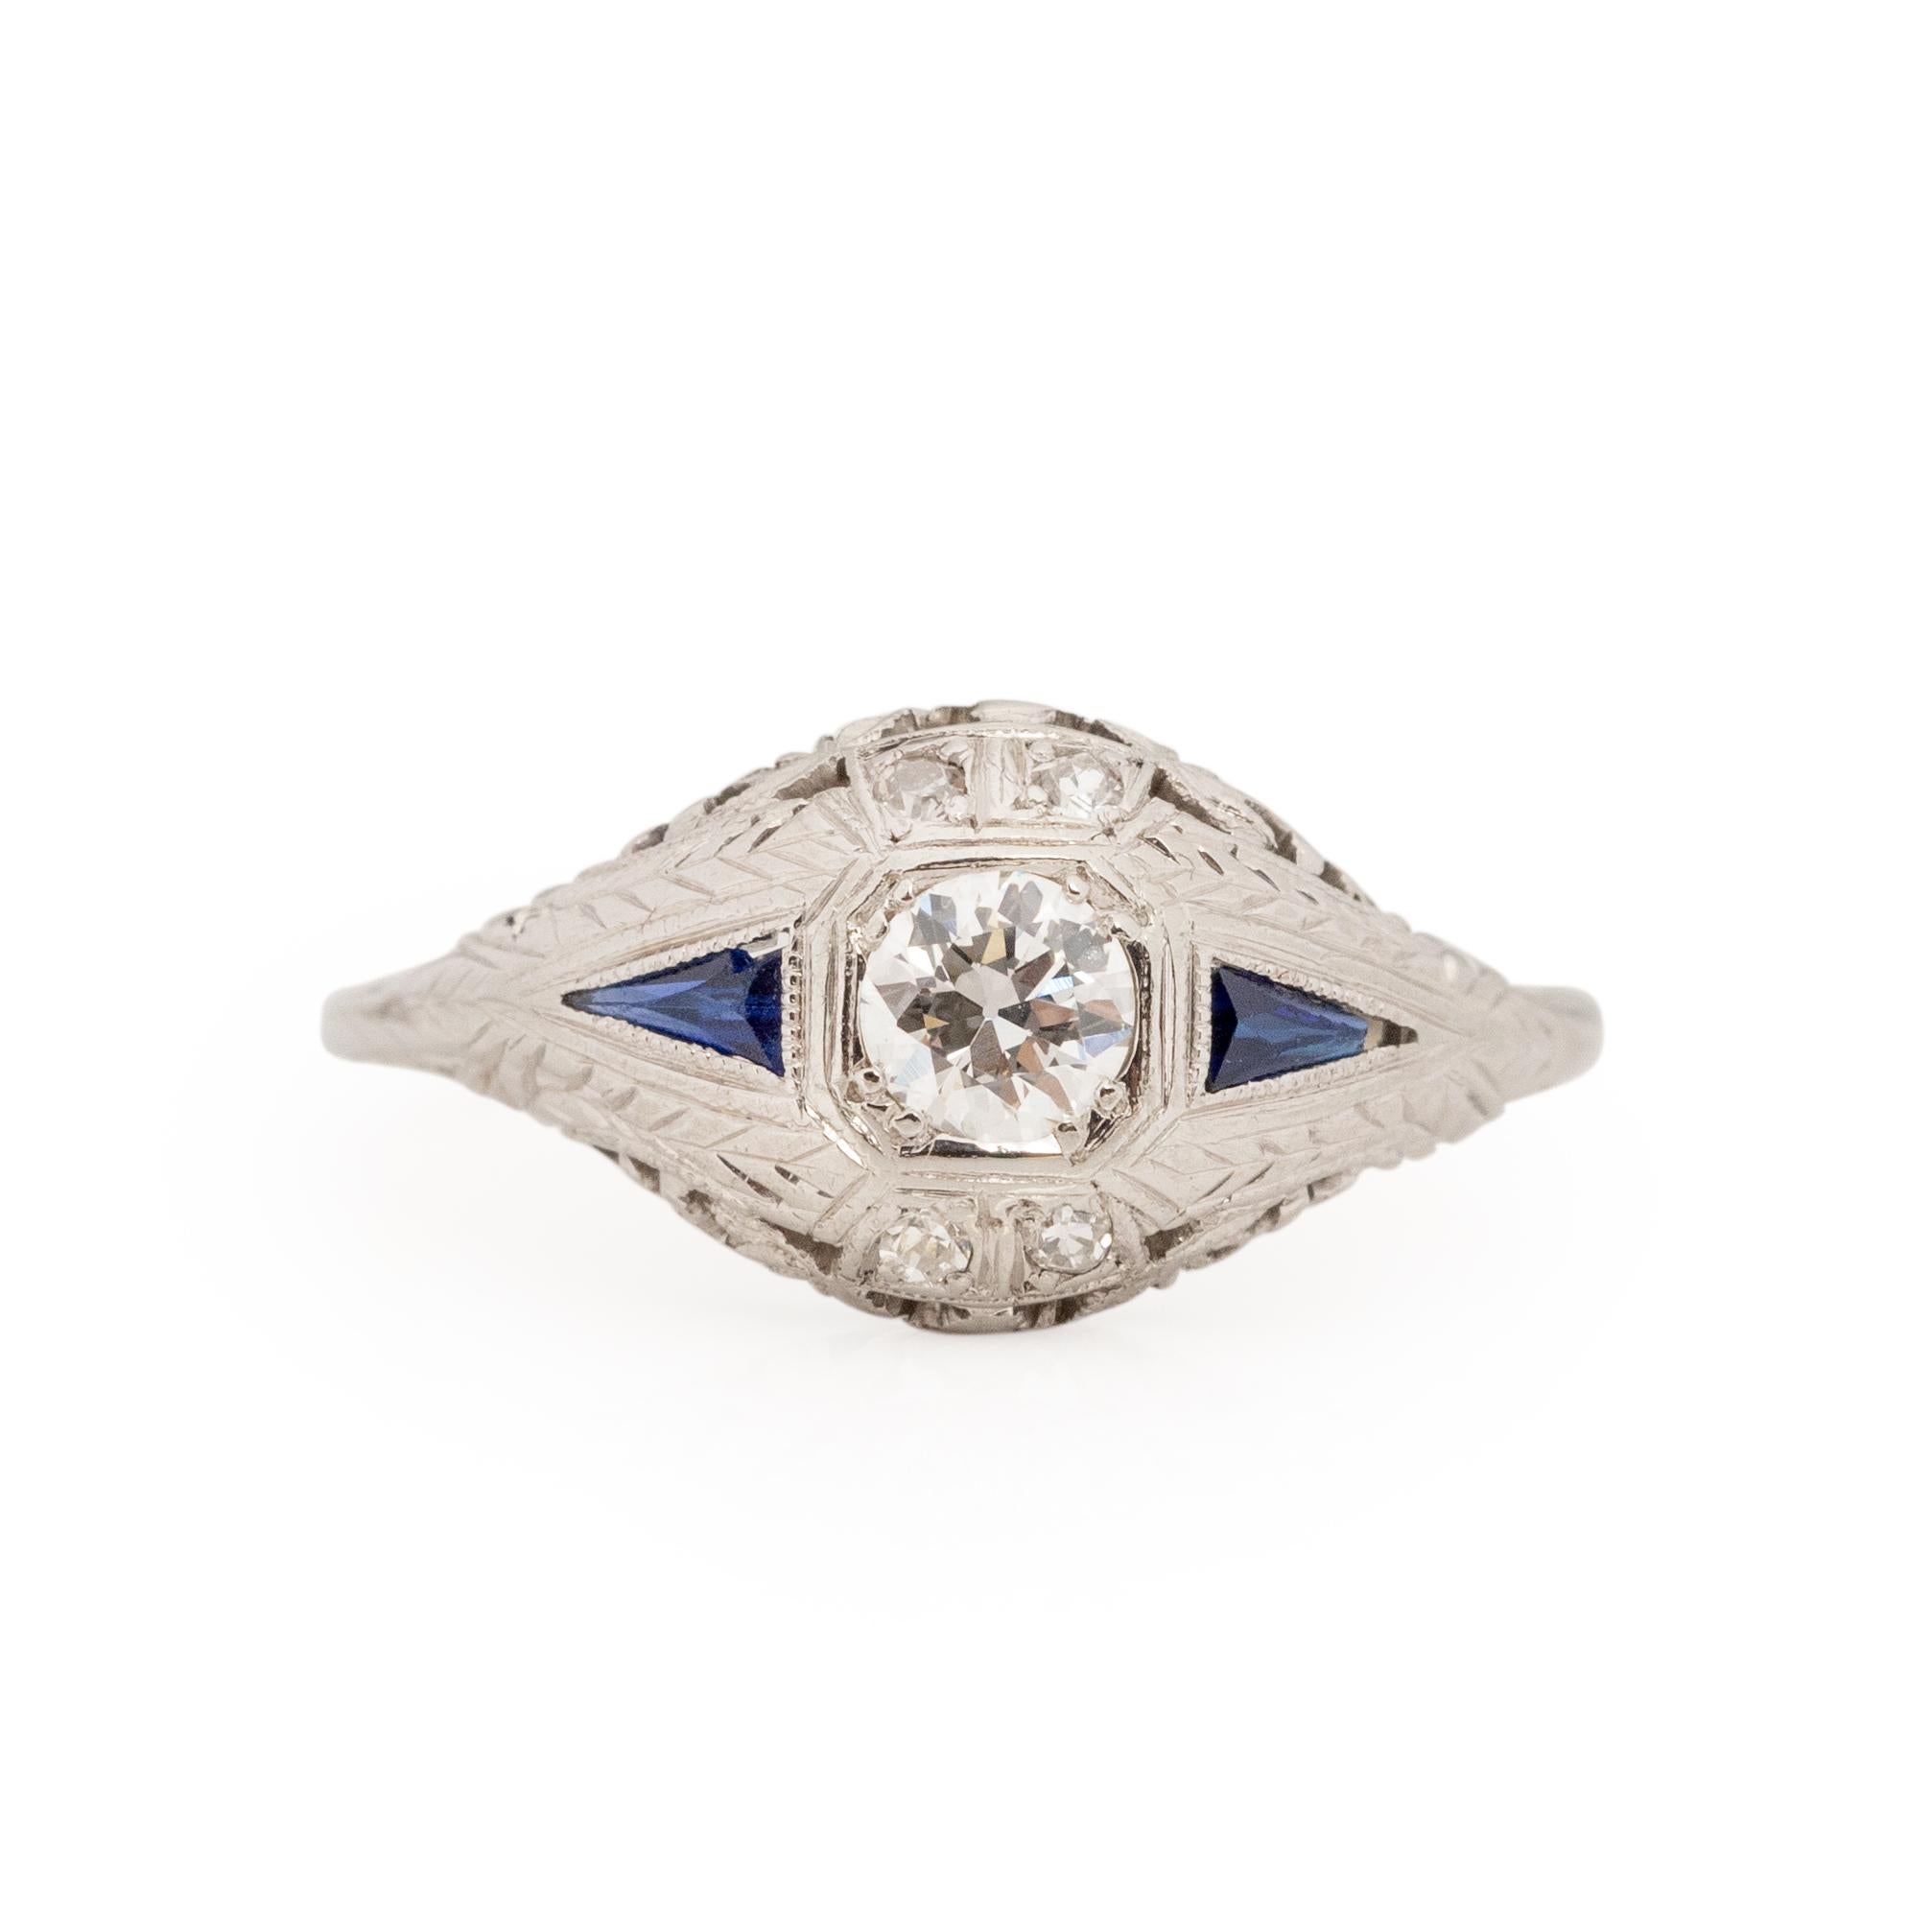 This little art deco classic has beautiful filigree carving along the gallery that allows light through. Lighting the center diamond and accent sapphires from underneath. The floral filigree design is a wonderful compliment to the white gold that